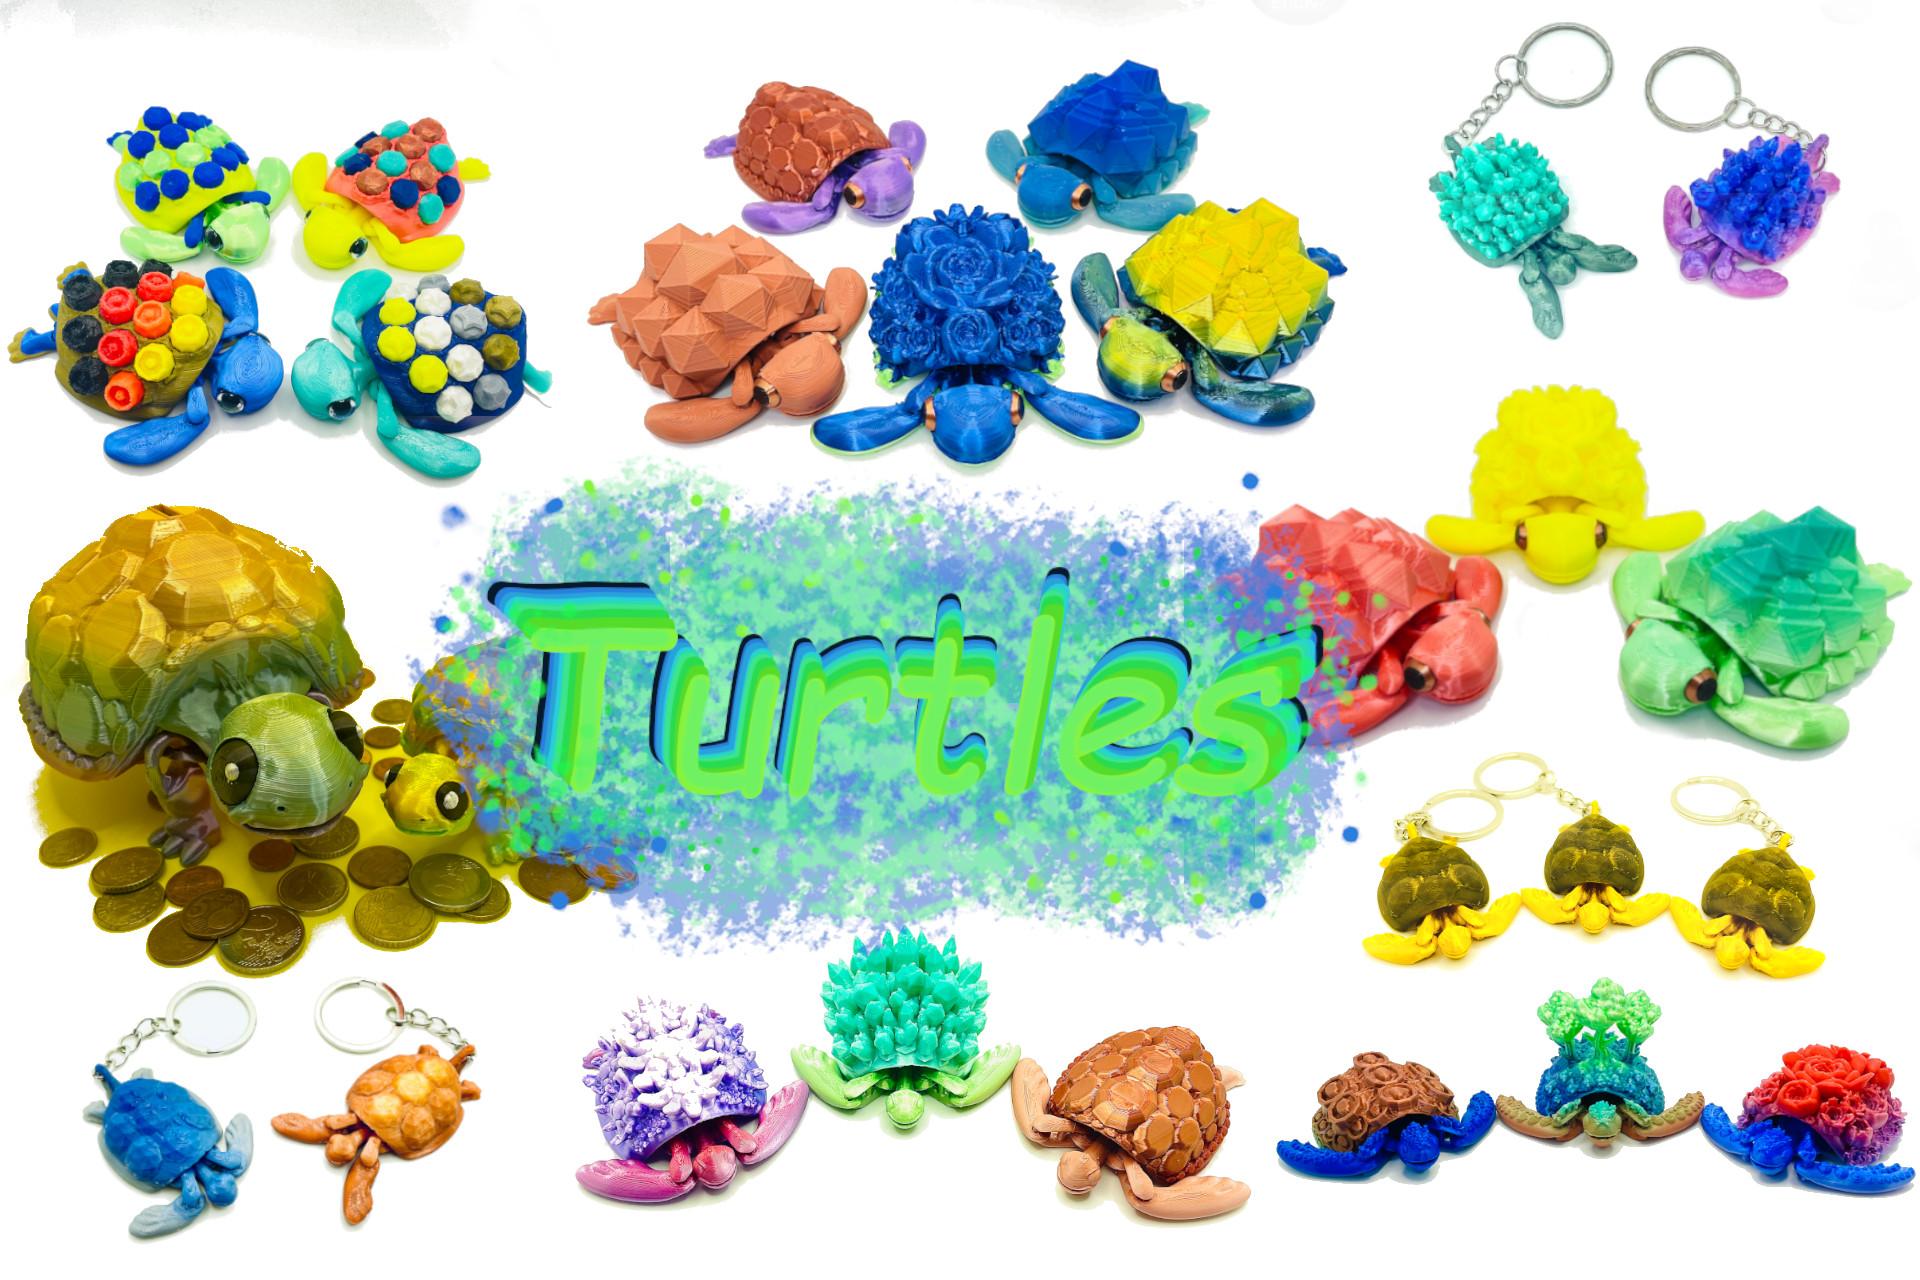 EndK7 Turtles now on Thangs3D!